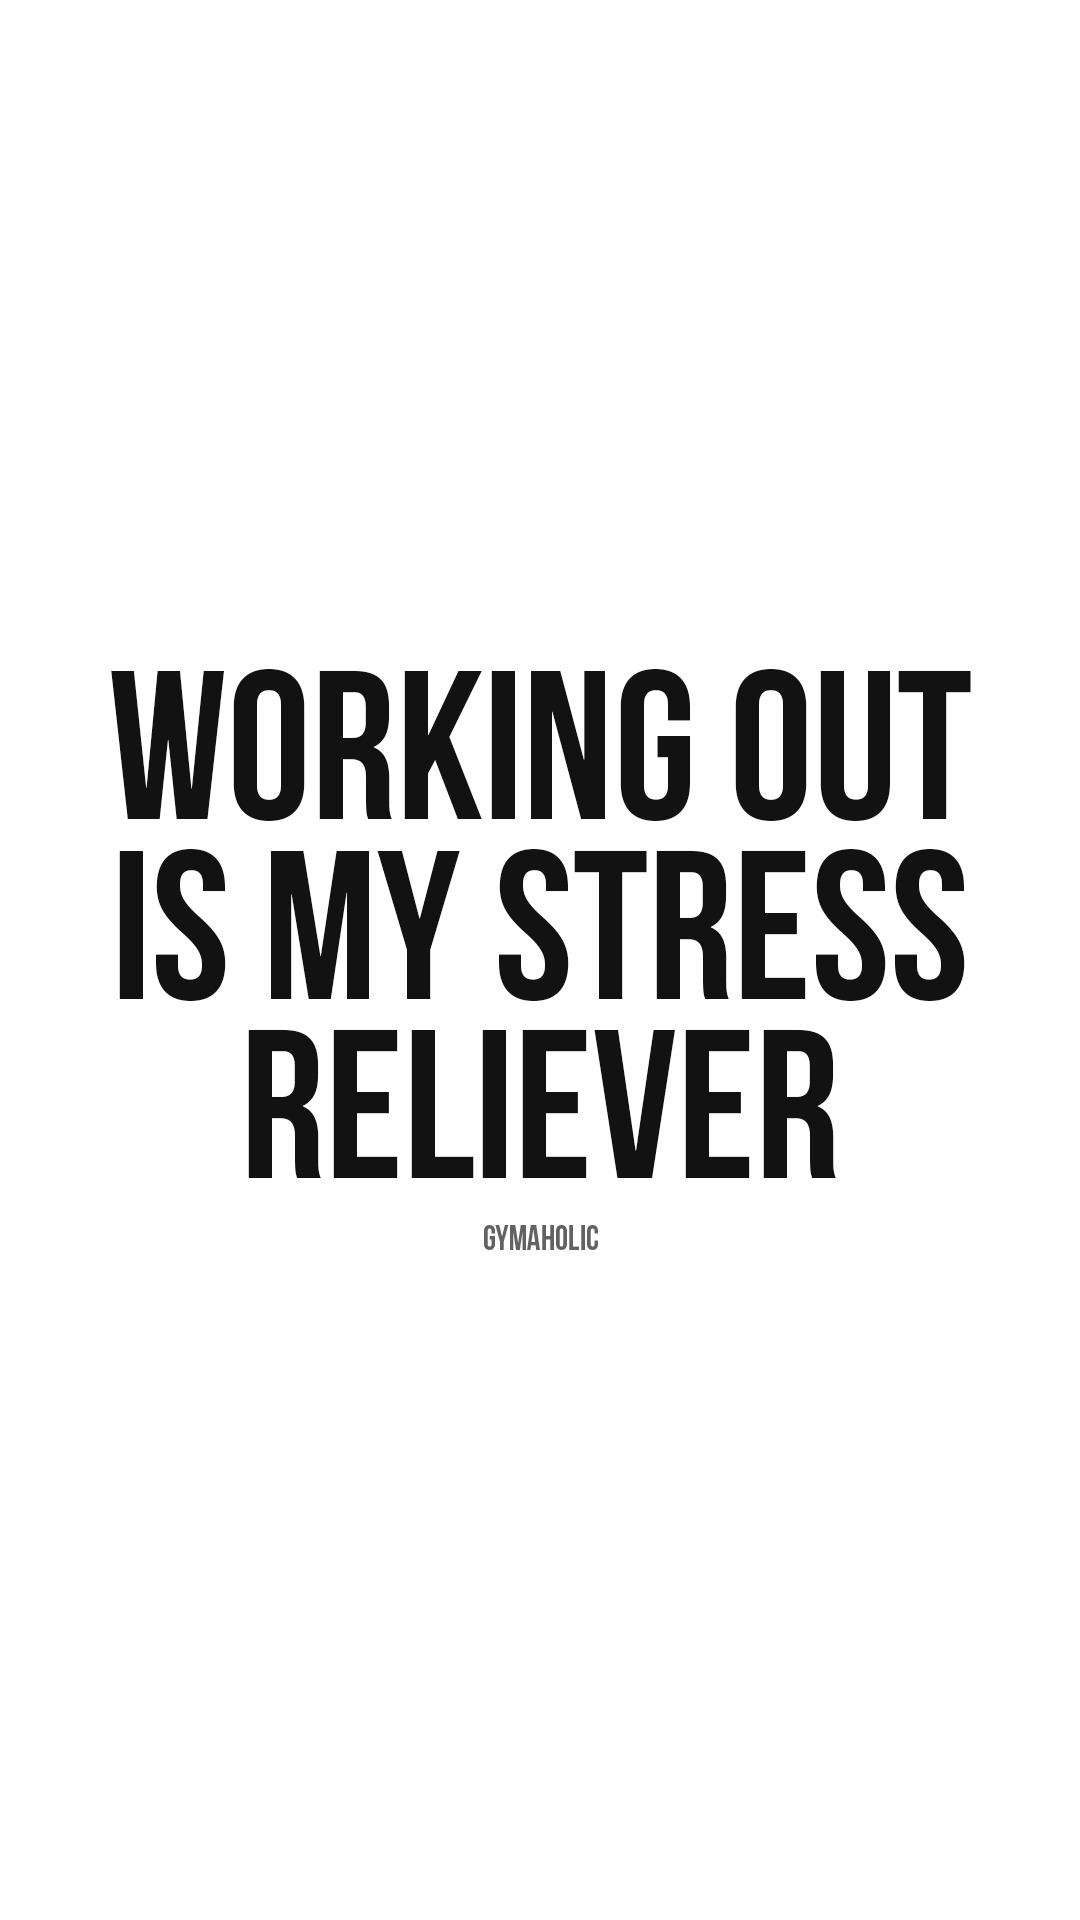 Working out is my stress reliever